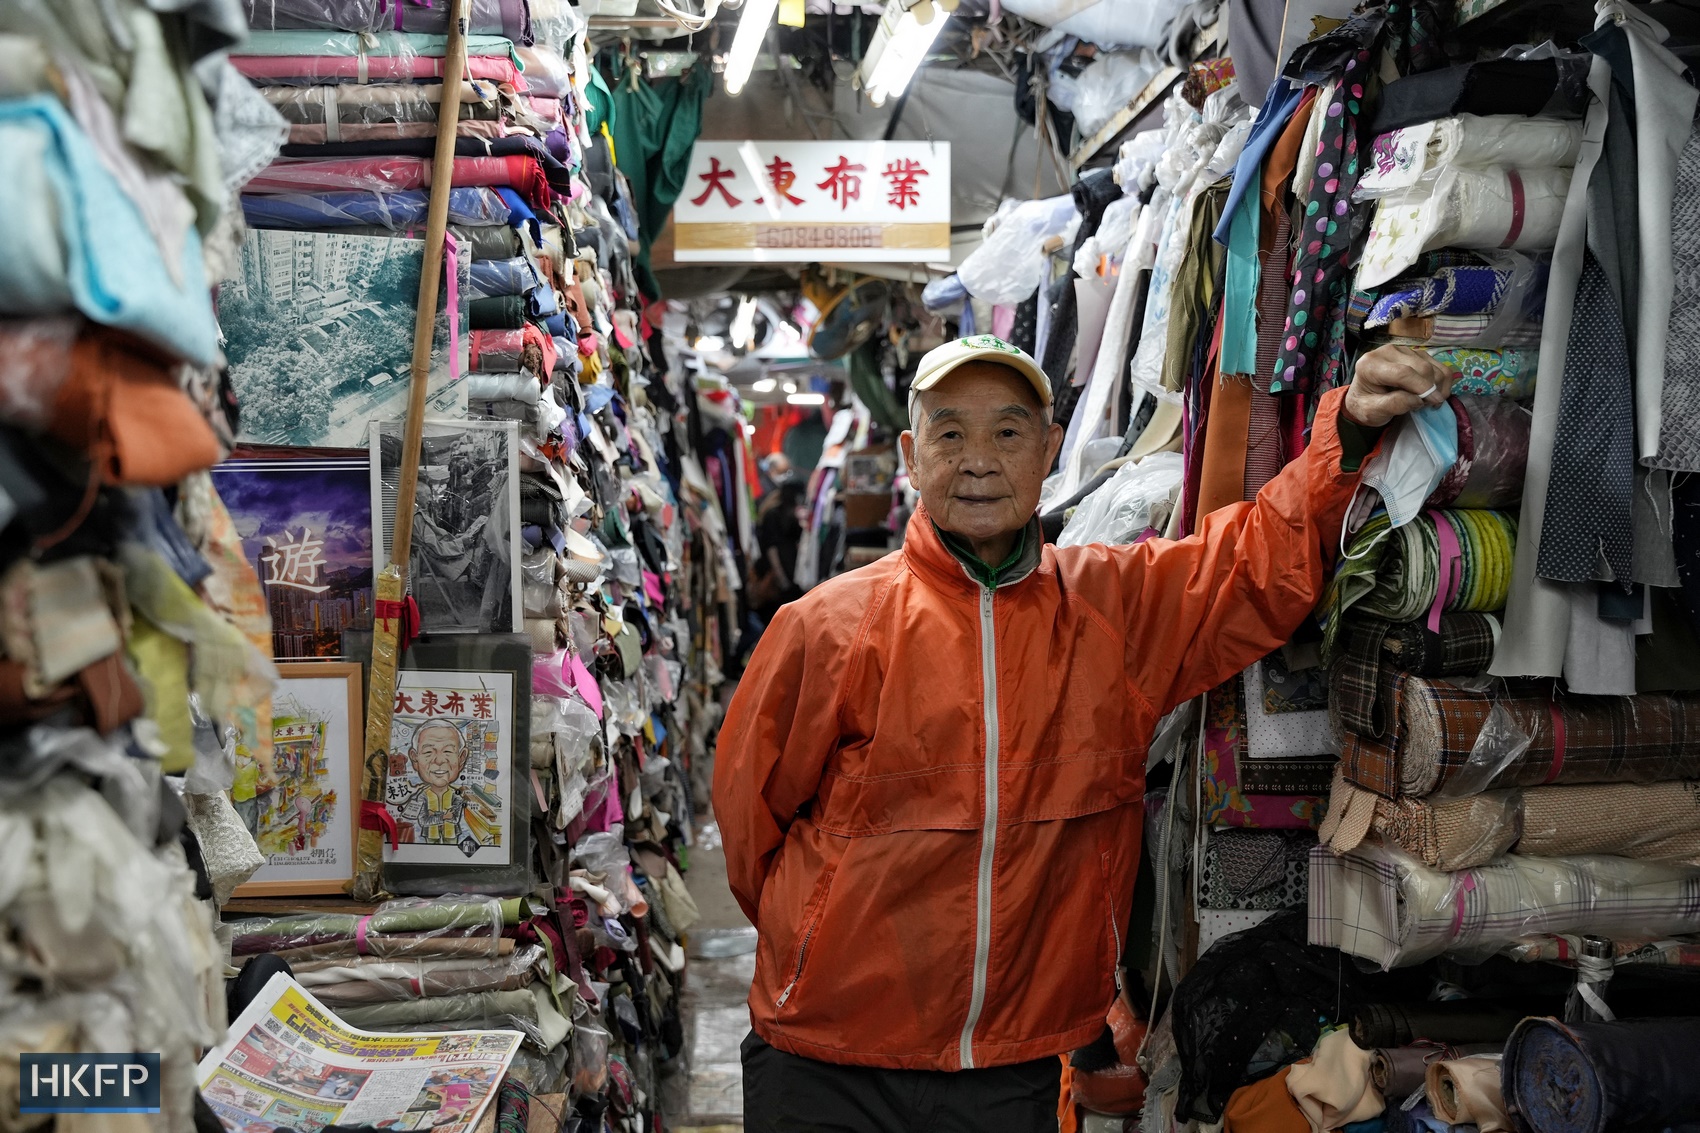 Fabric seller Uncle Tung, 90, at Yen Chow Street Hawker Bazaar in Sham Shui Po, Hong Kong, on December 29, 2022. Photo: Kyle Lam/HKFP.